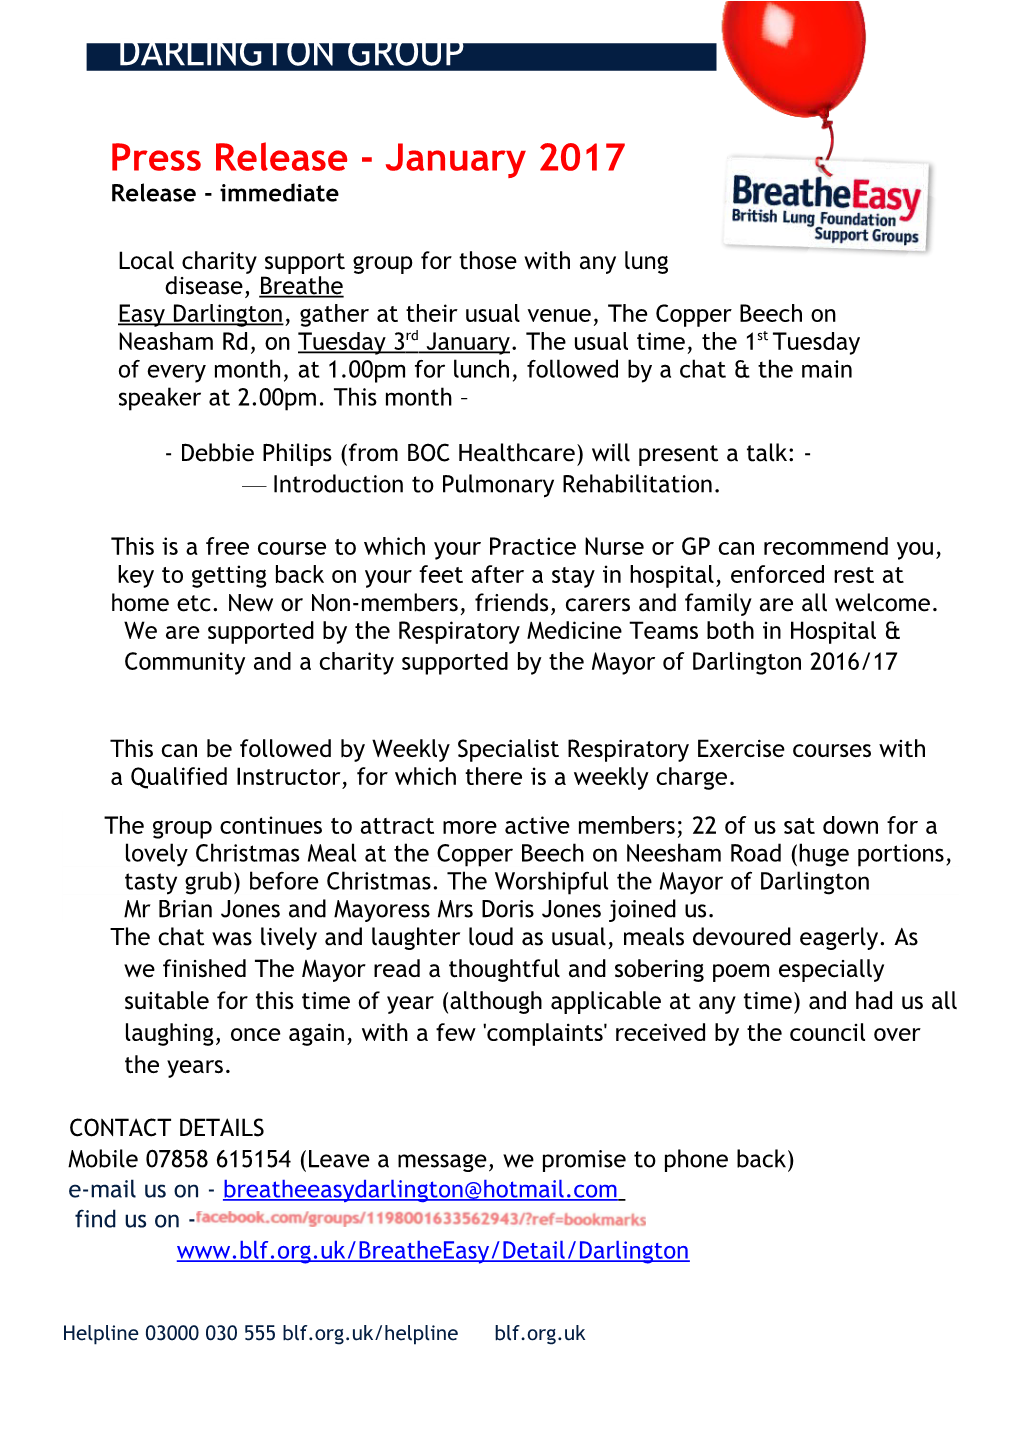 Local Charity Support Group for Those with Any Lung Disease, Breathe